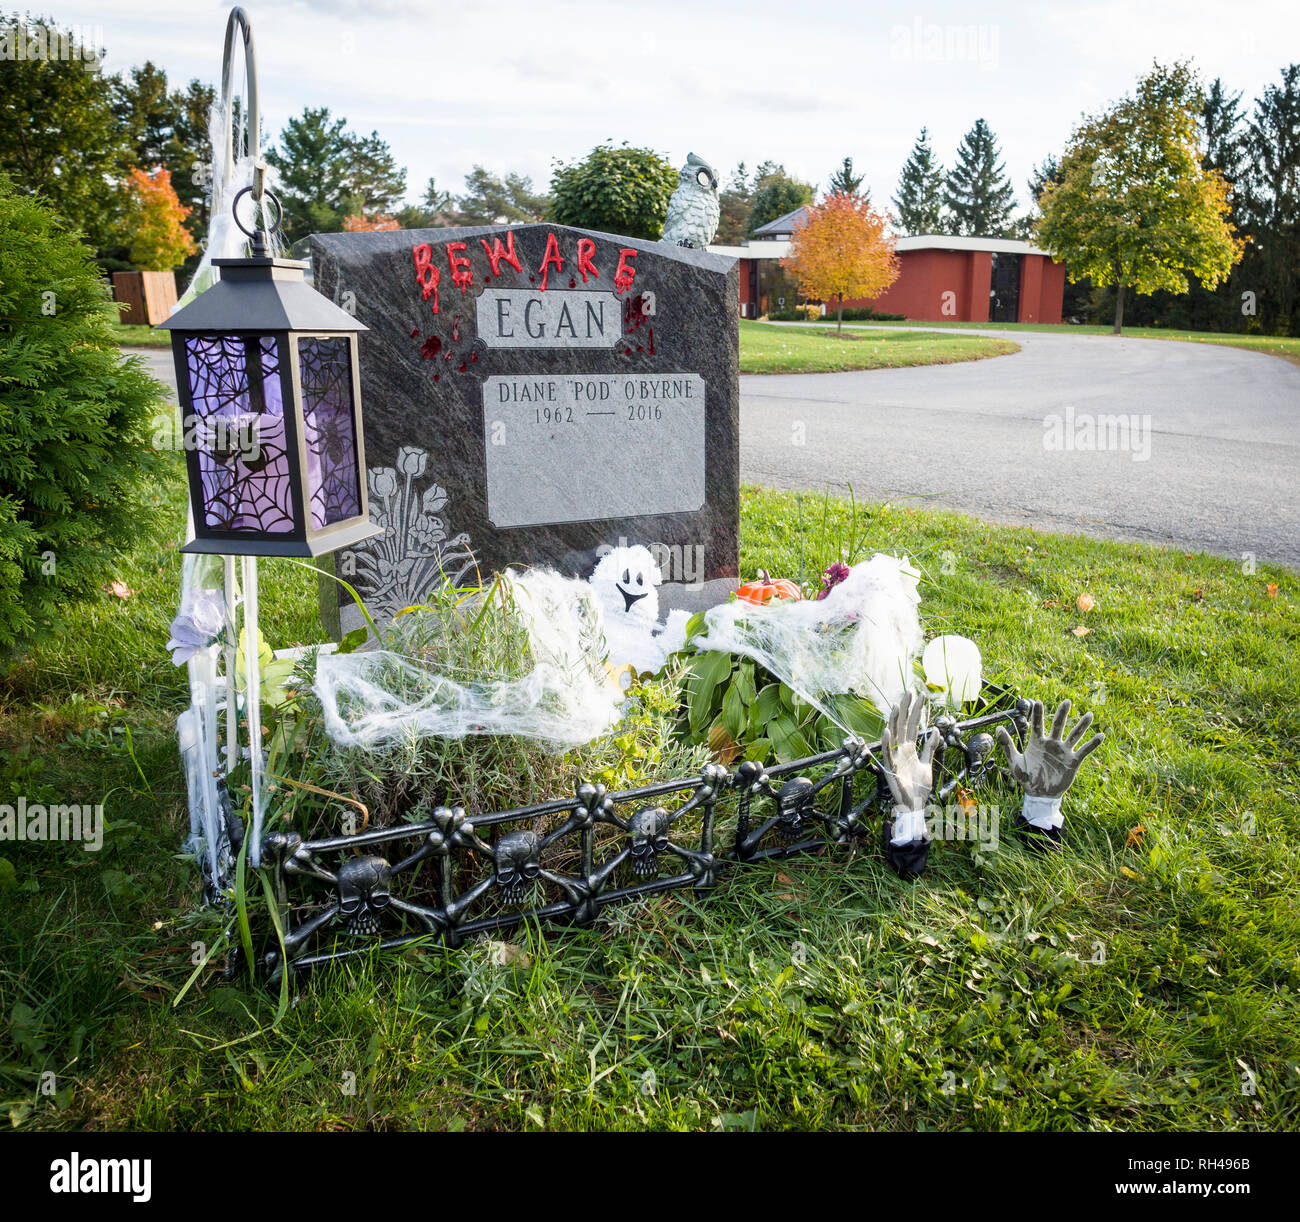 Grave decorated for Halloween: A graves stone of Diane O'byrne Egan decorated with BEWARE written in fake blood and other kitchy halloween items. Stock Photo